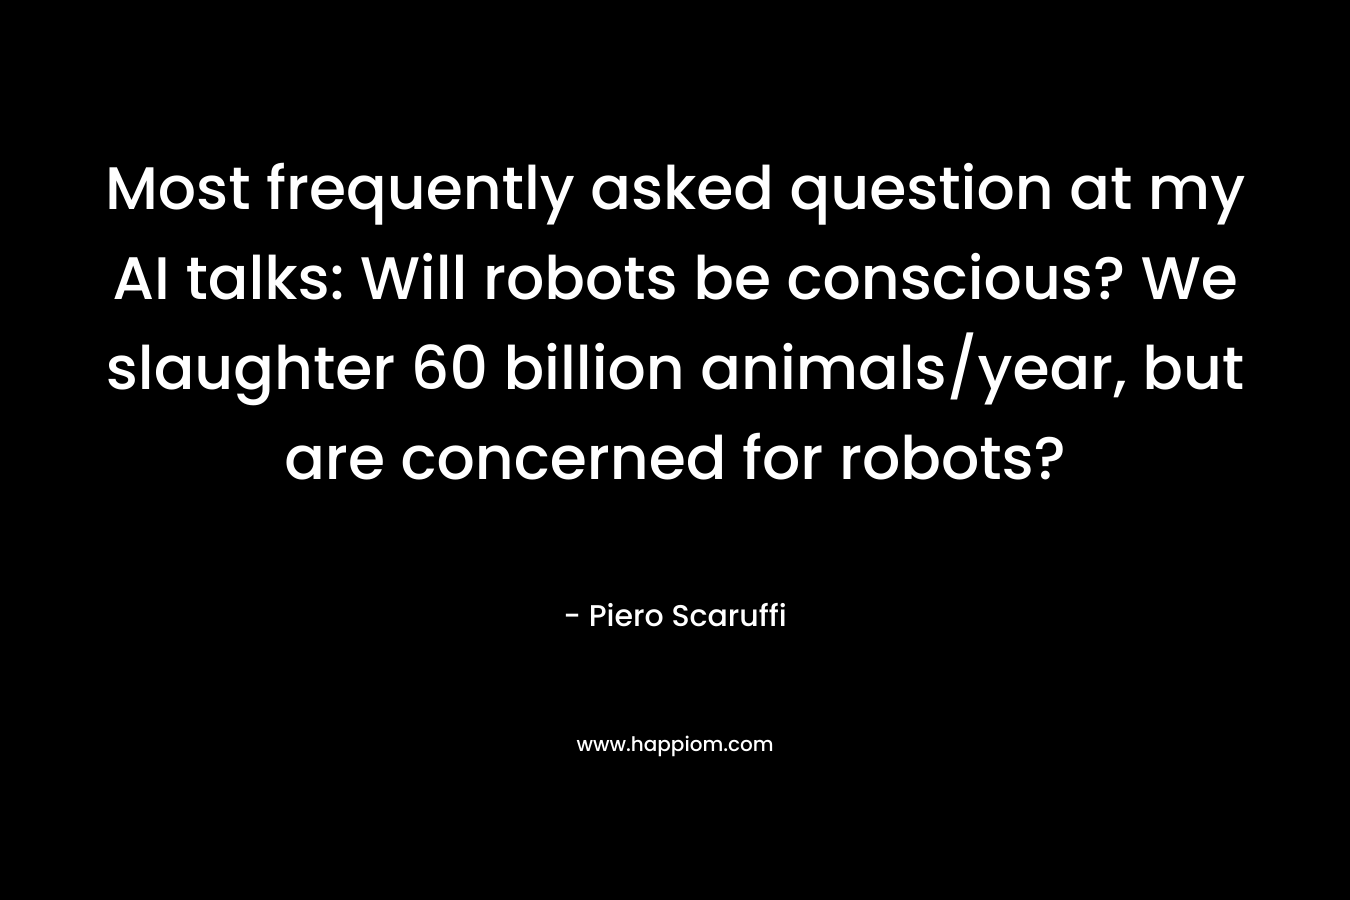 Most frequently asked question at my AI talks: Will robots be conscious? We slaughter 60 billion animals/year, but are concerned for robots?